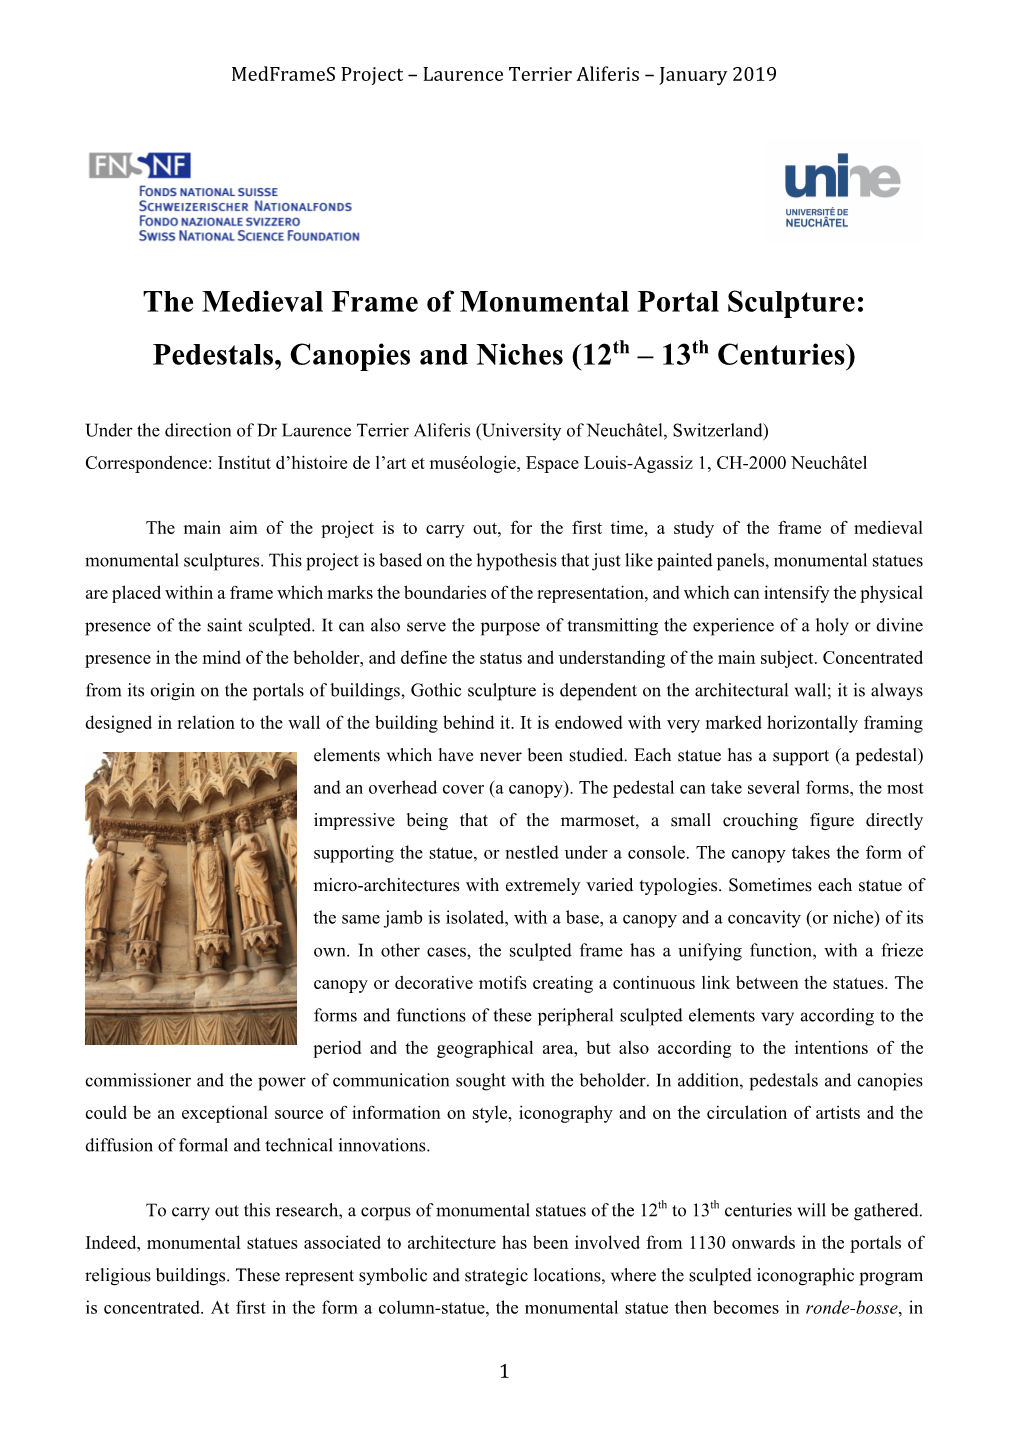 The Medieval Frame of Monumental Portal Sculpture: Pedestals, Canopies and Niches (12Th – 13Th Centuries)